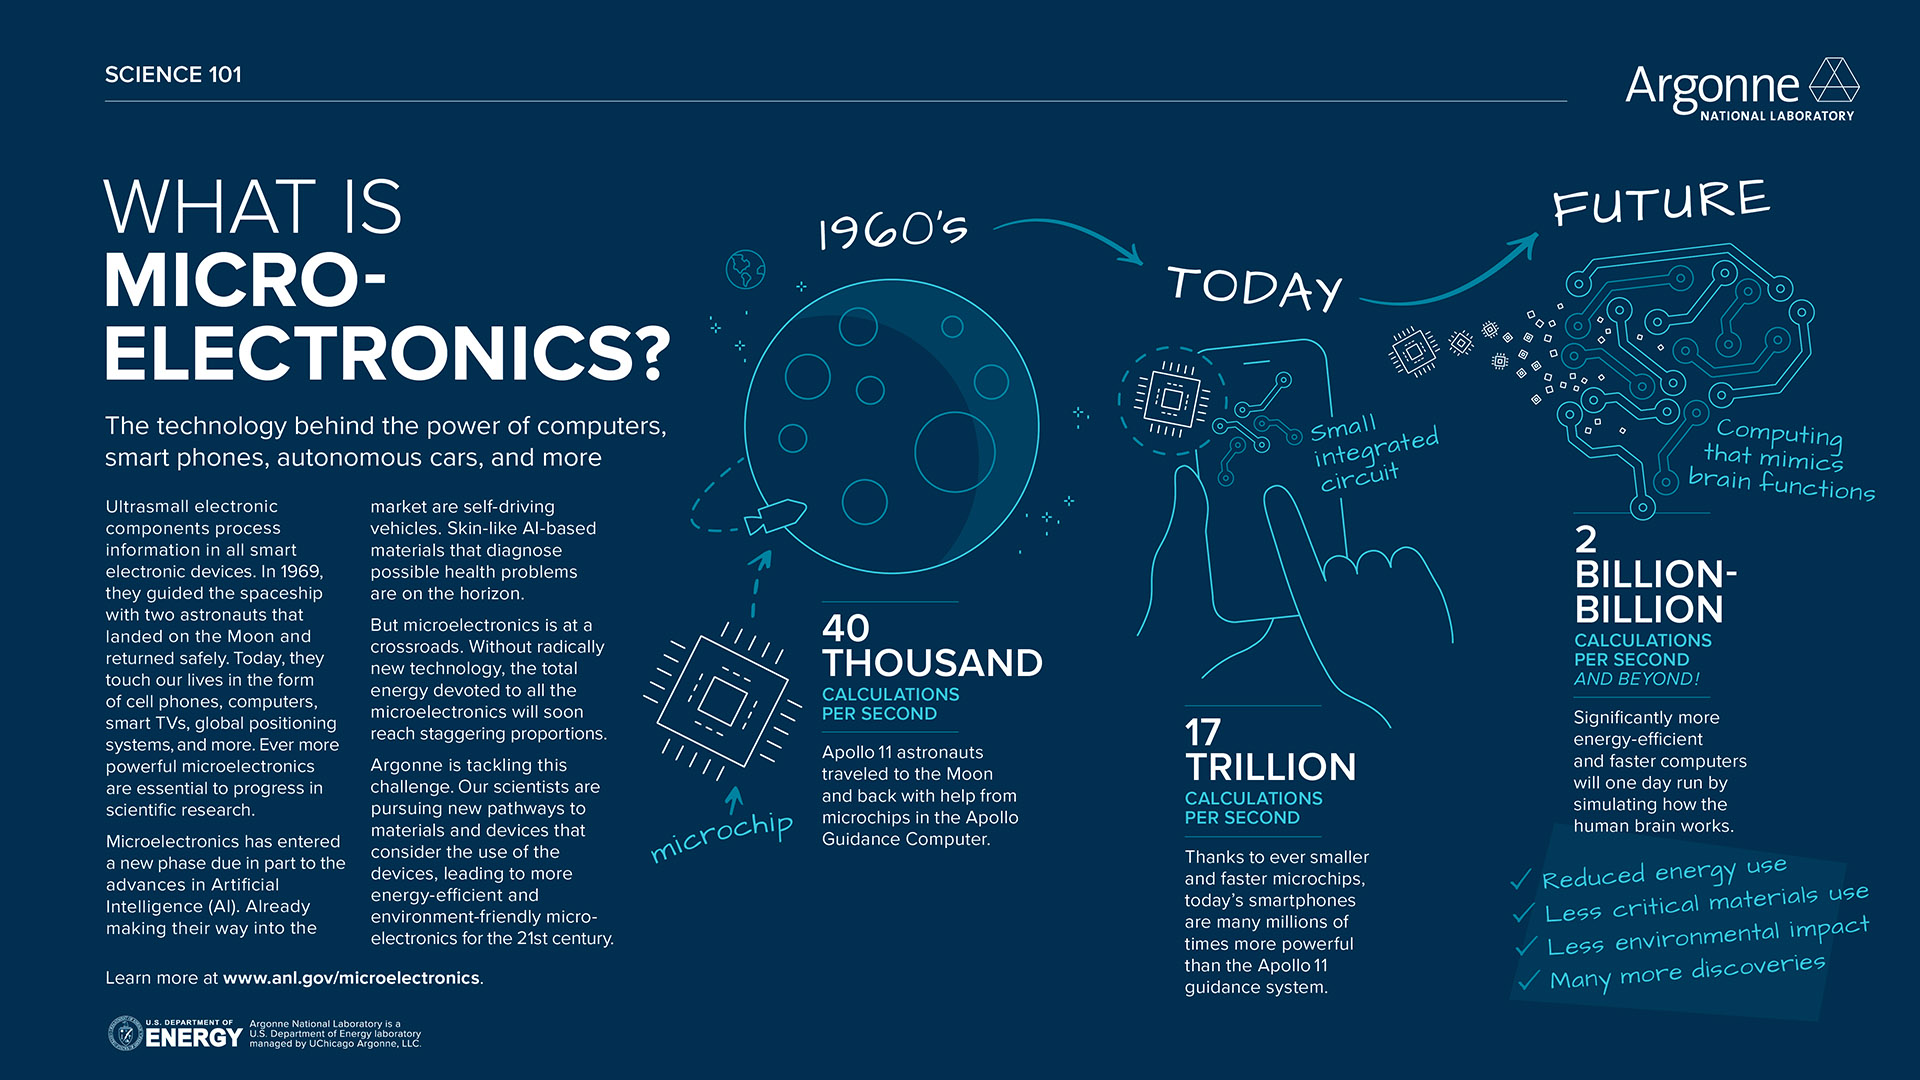 Science 101 Microelectronics infographic with white text and images on blue background